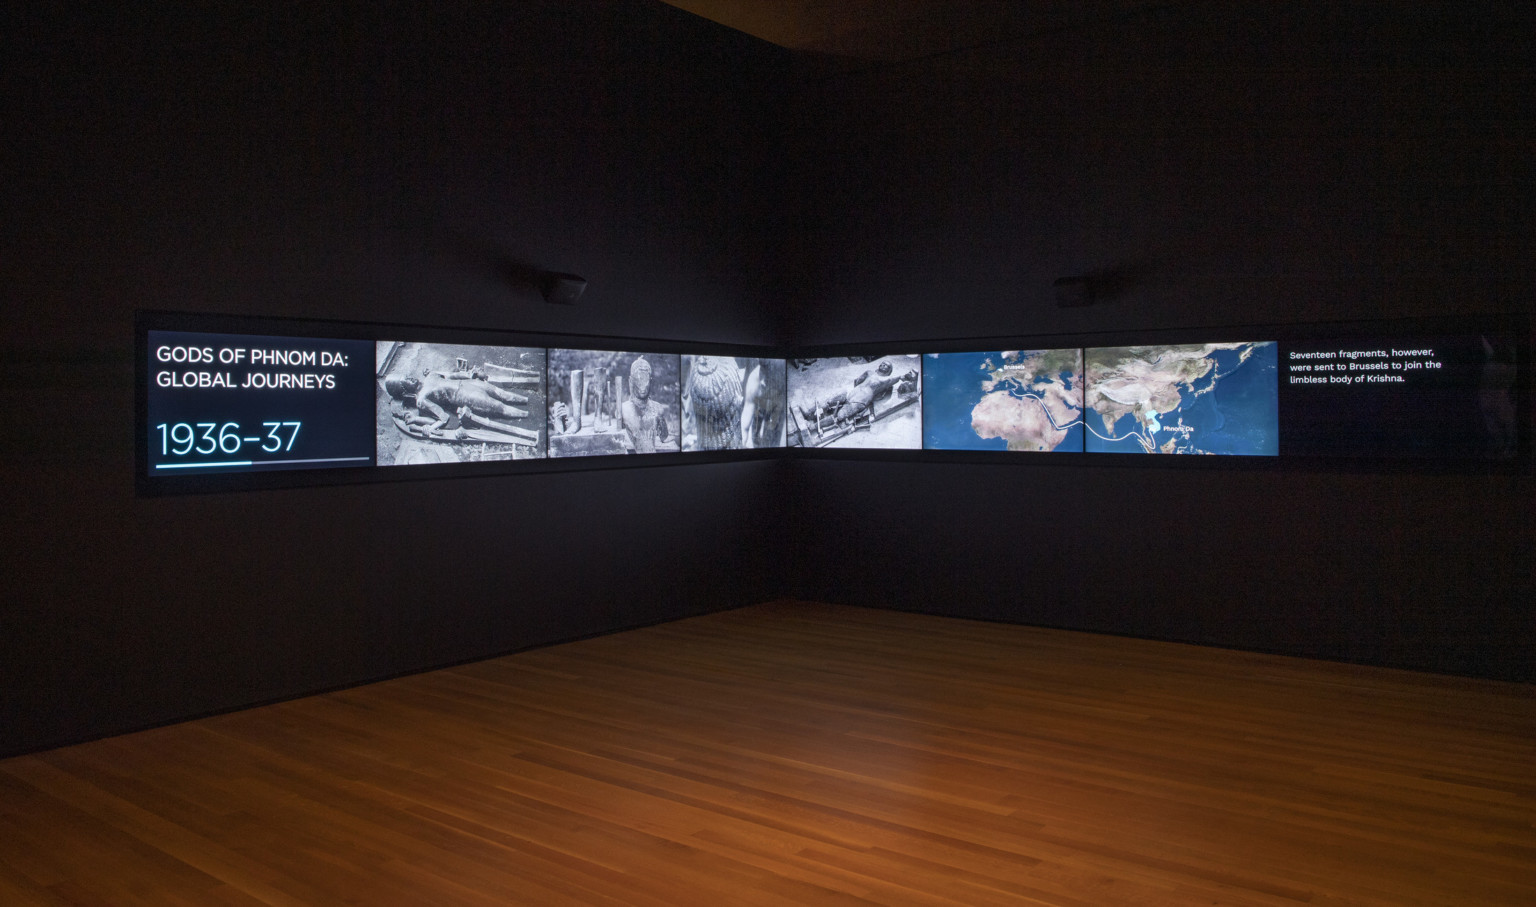 wood floor and two black walls with a timeline on large digital screens showing the journeys of the gods of phnom da 1936-37